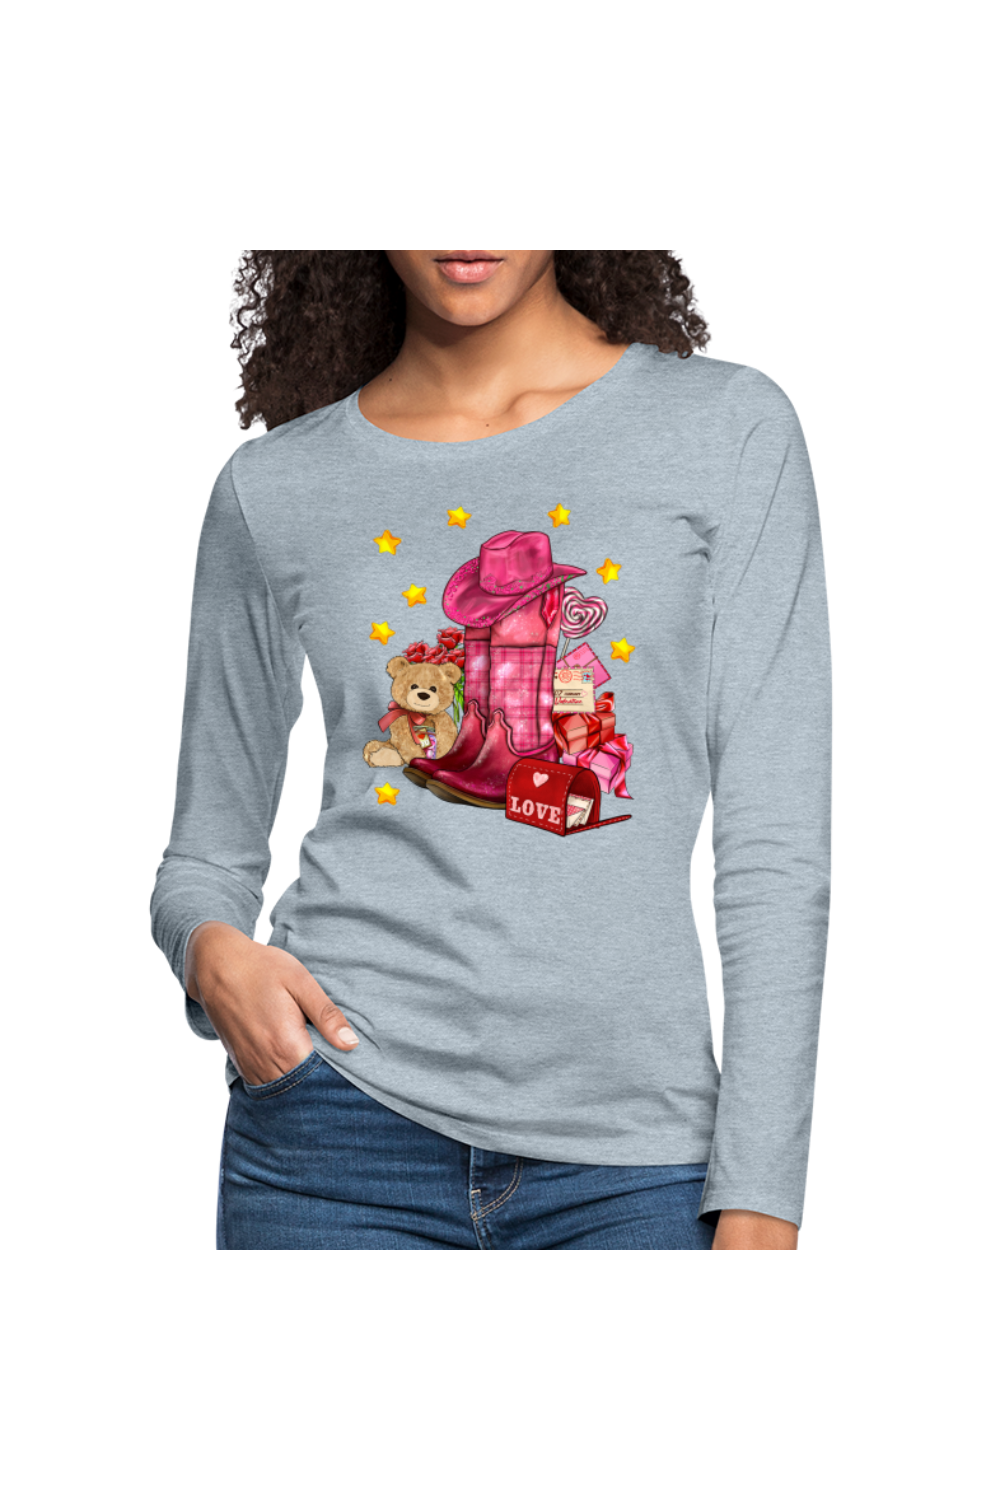 Women's Valentine's Day Cow Girl Hat and Boots Long Sleeve T-Shirt - heather ice blue - NicholesGifts.online